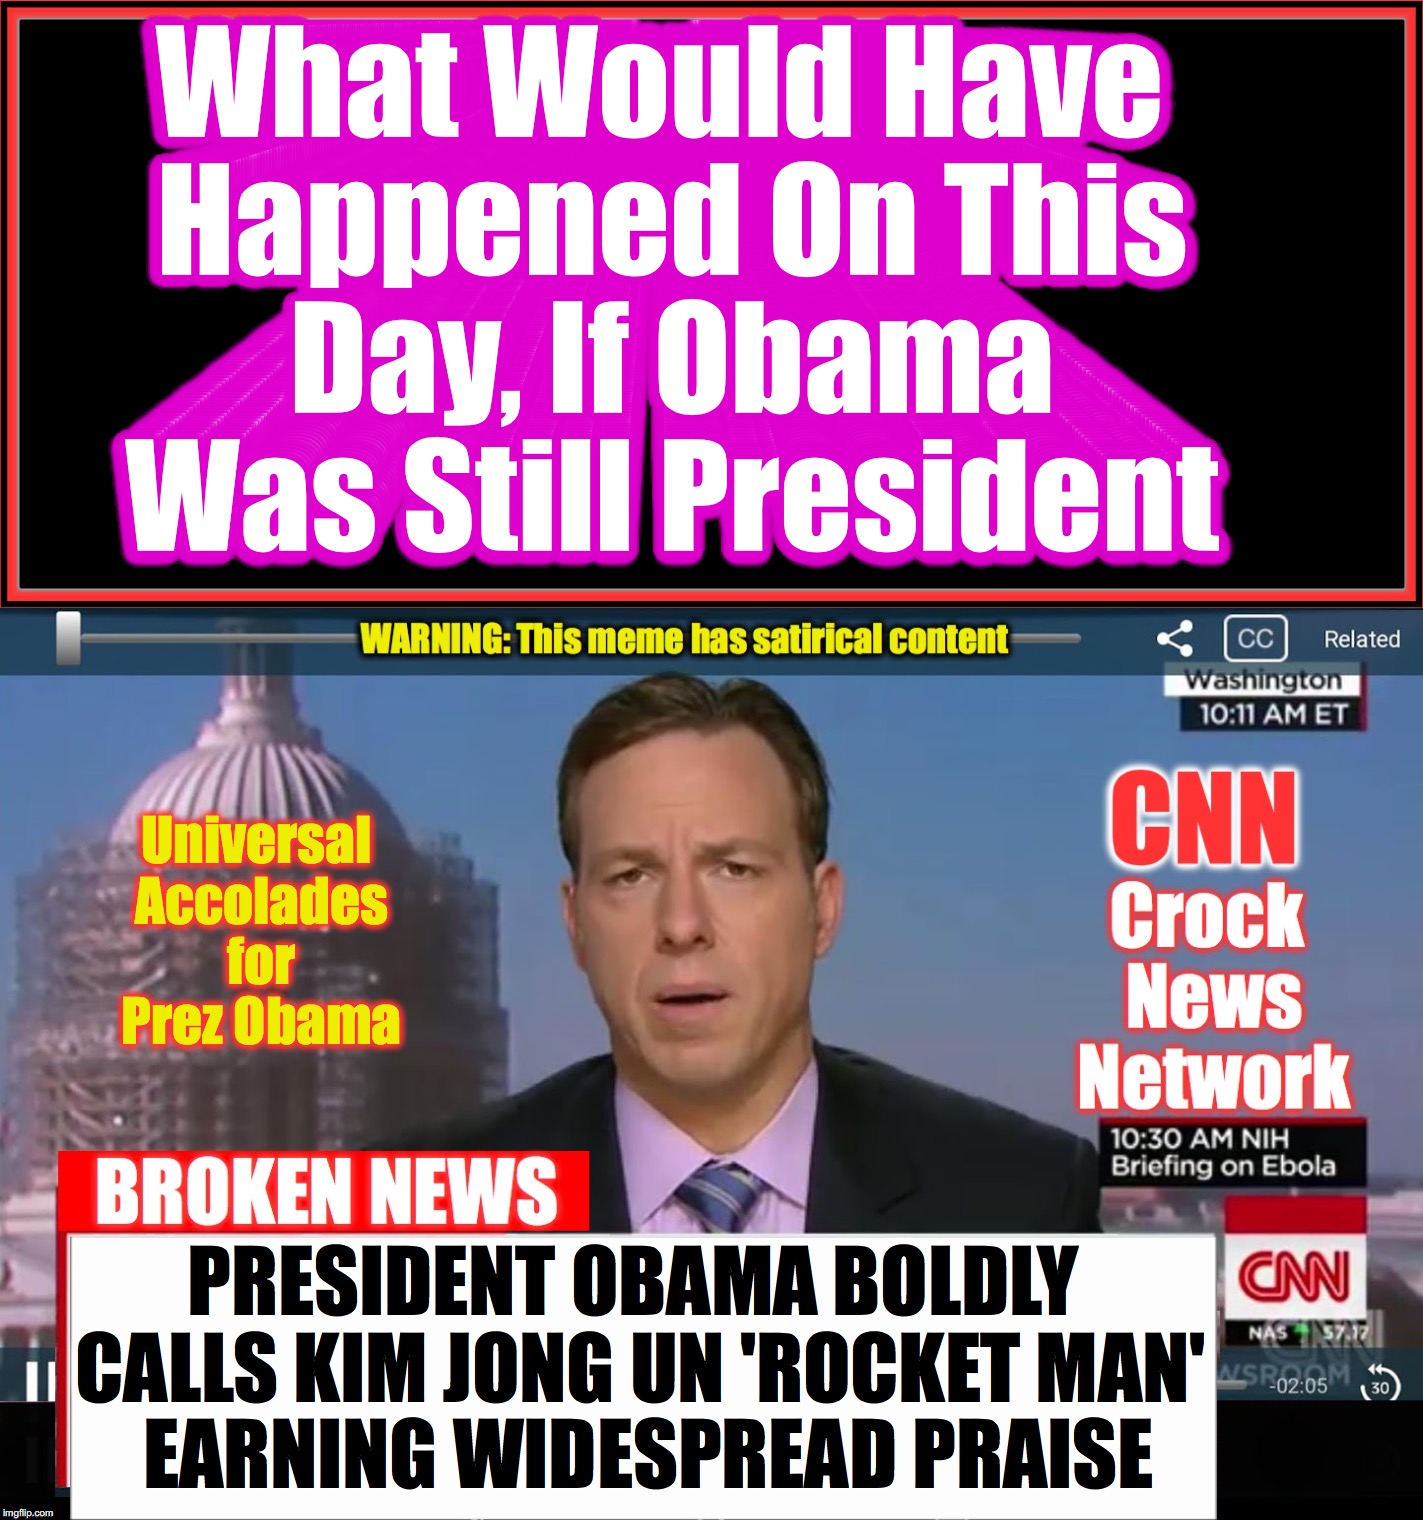 you KNOW it would have been reported like this! | What Would Have Happened On This Day, If Obama Was Still President; Universal Accolades for Prez Obama; PRESIDENT OBAMA BOLDLY CALLS KIM JONG UN 'ROCKET MAN'  EARNING WIDESPREAD PRAISE | image tagged in cnn crazy news network,kim jong un,fake news,rocket man | made w/ Imgflip meme maker